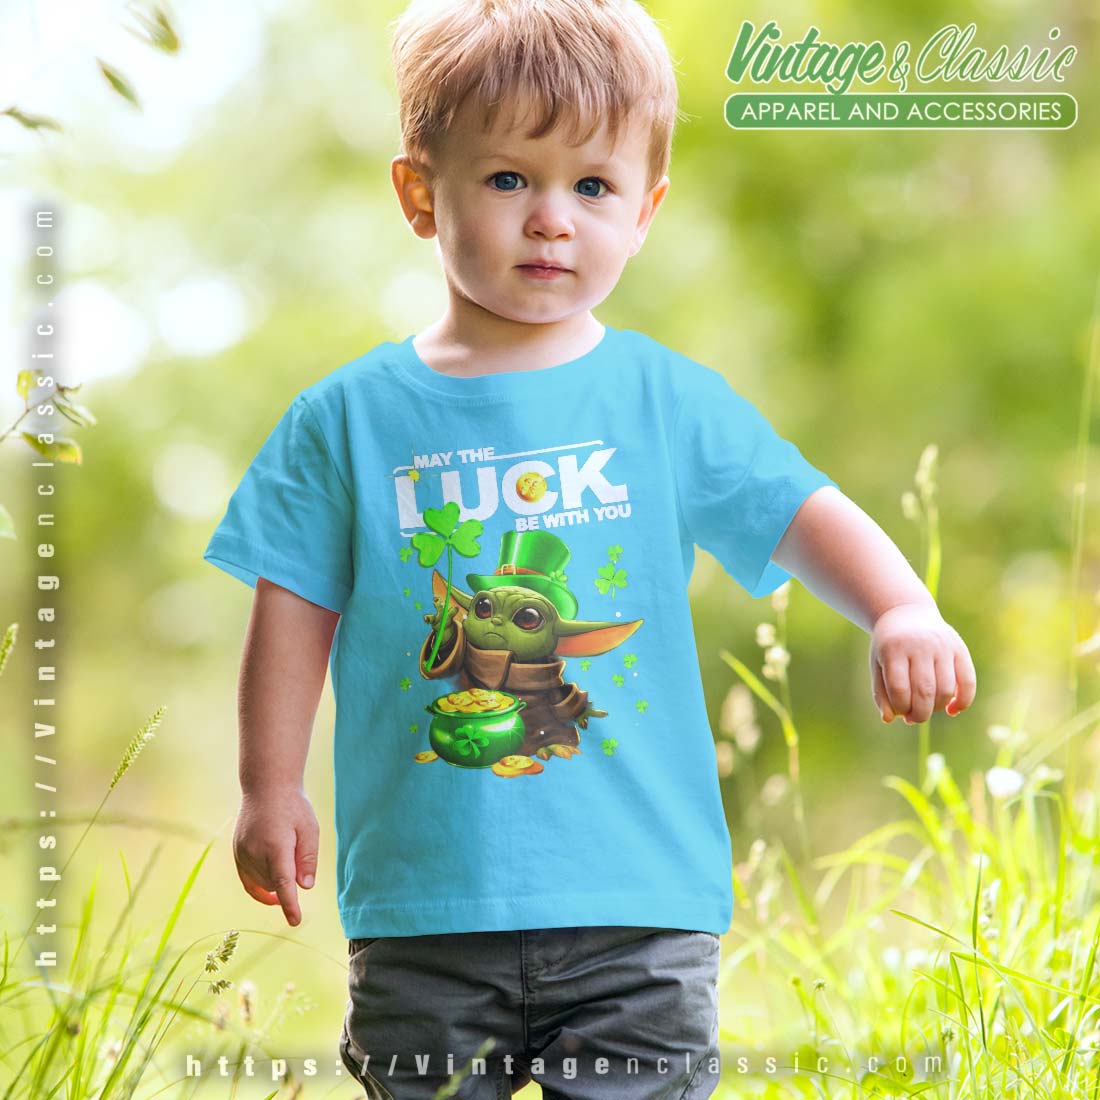 Baby Yoda May The Luck Be With You St Patricks Day Shirt - High